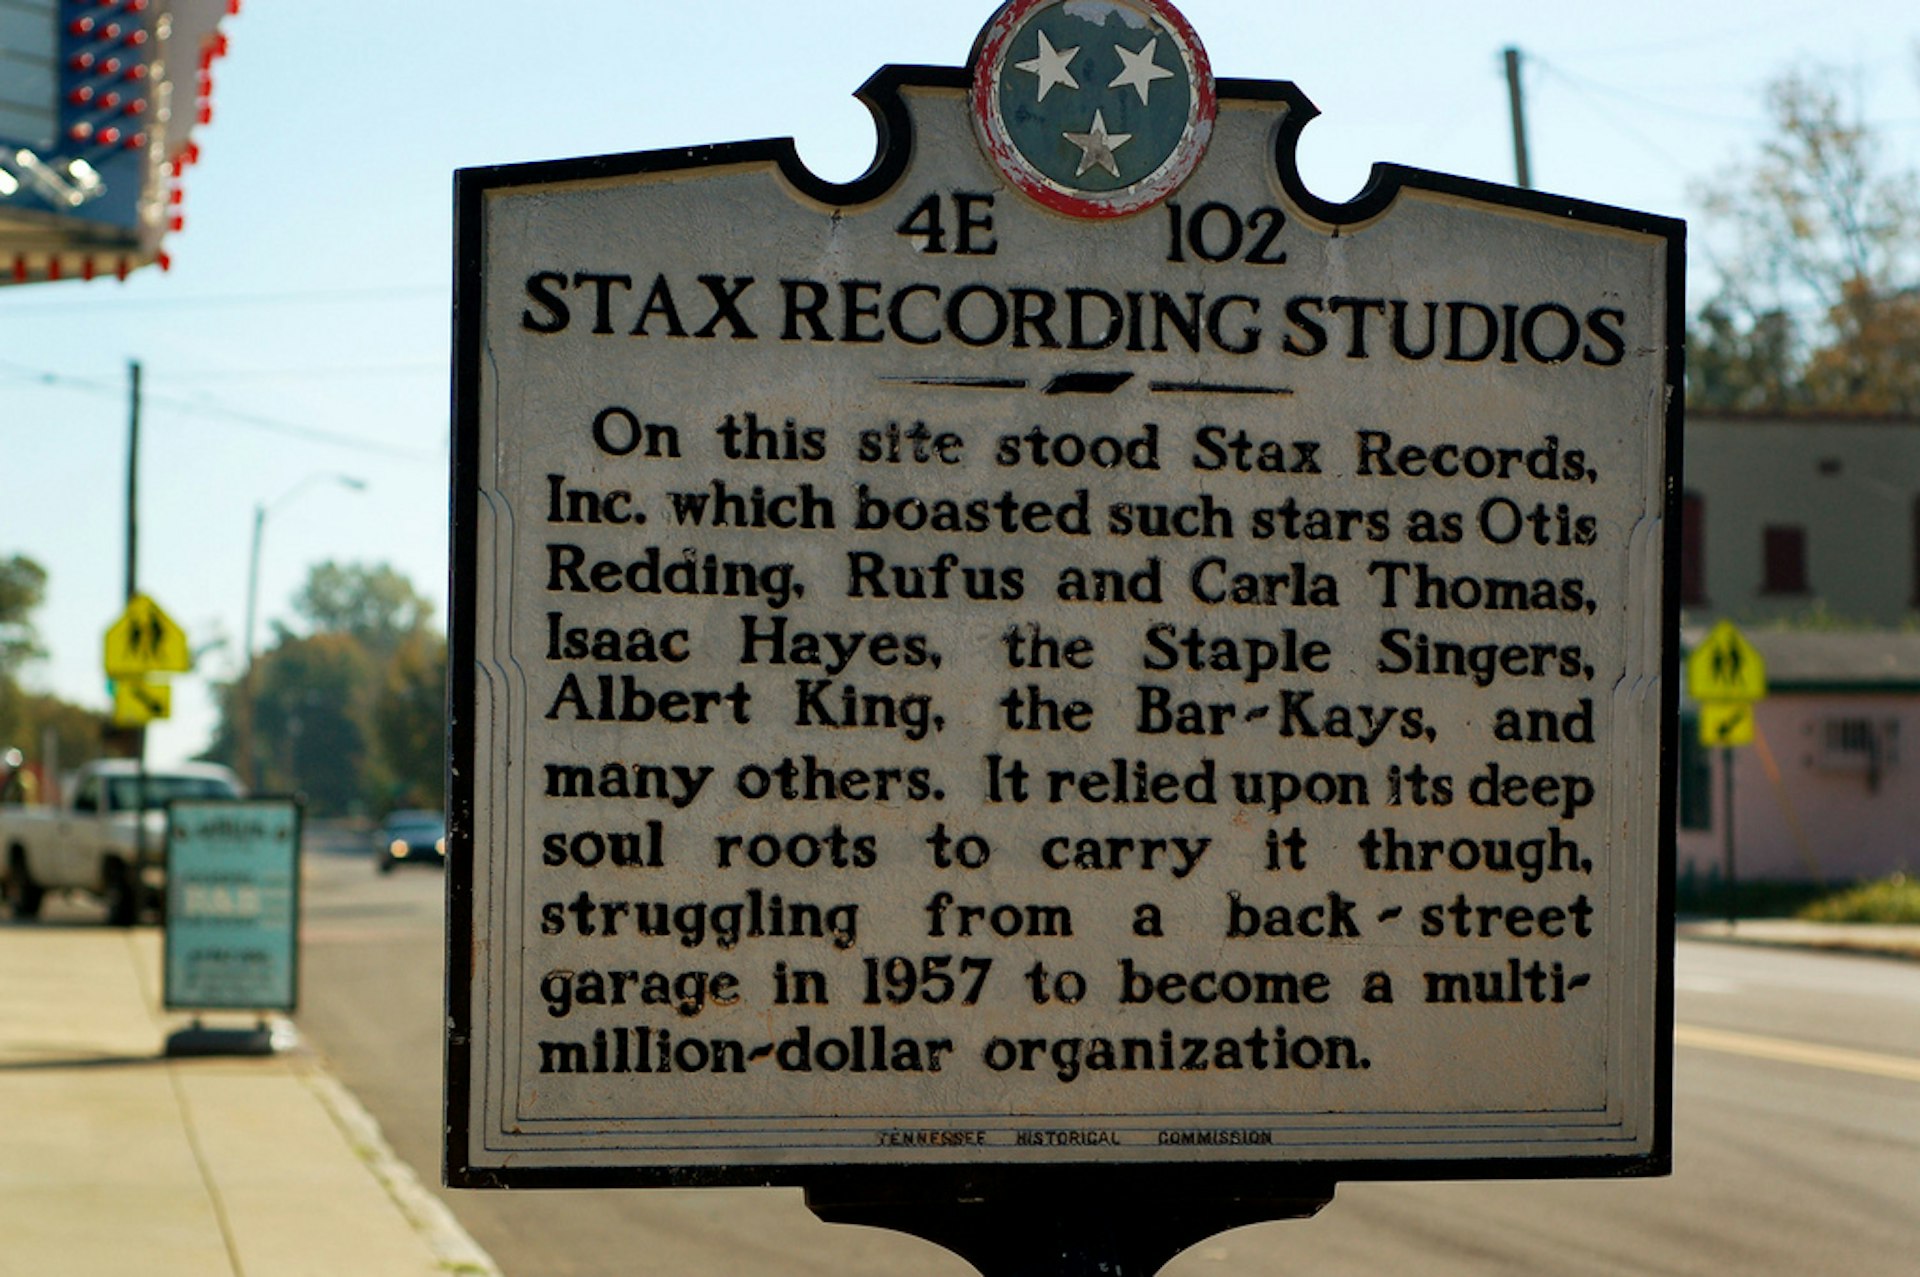 Stax Museum of American Soul Museum. Photo by Stephen Saks/Getty Images